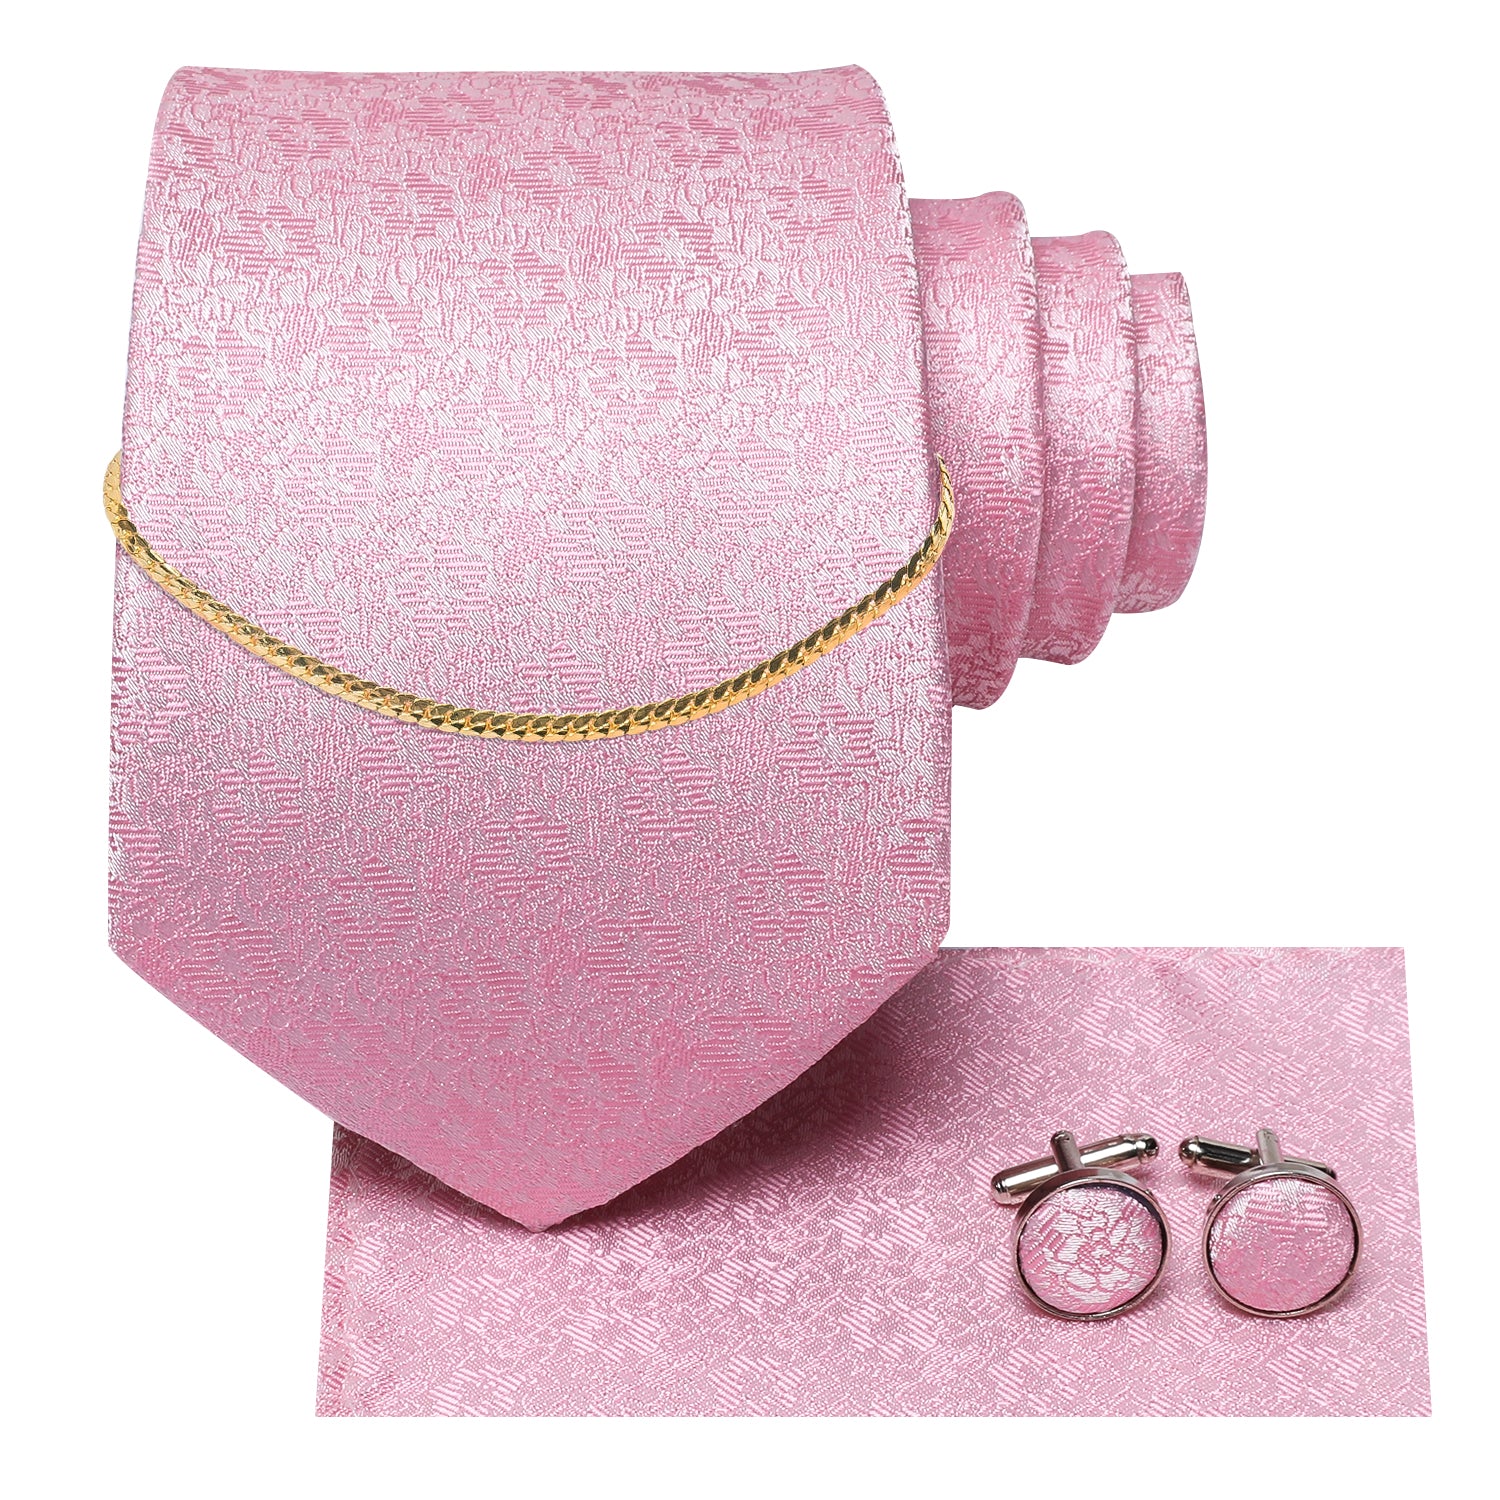 Silver Pink Floral Men's Tie Pocket Square Cufflinks Set With Golden Chain